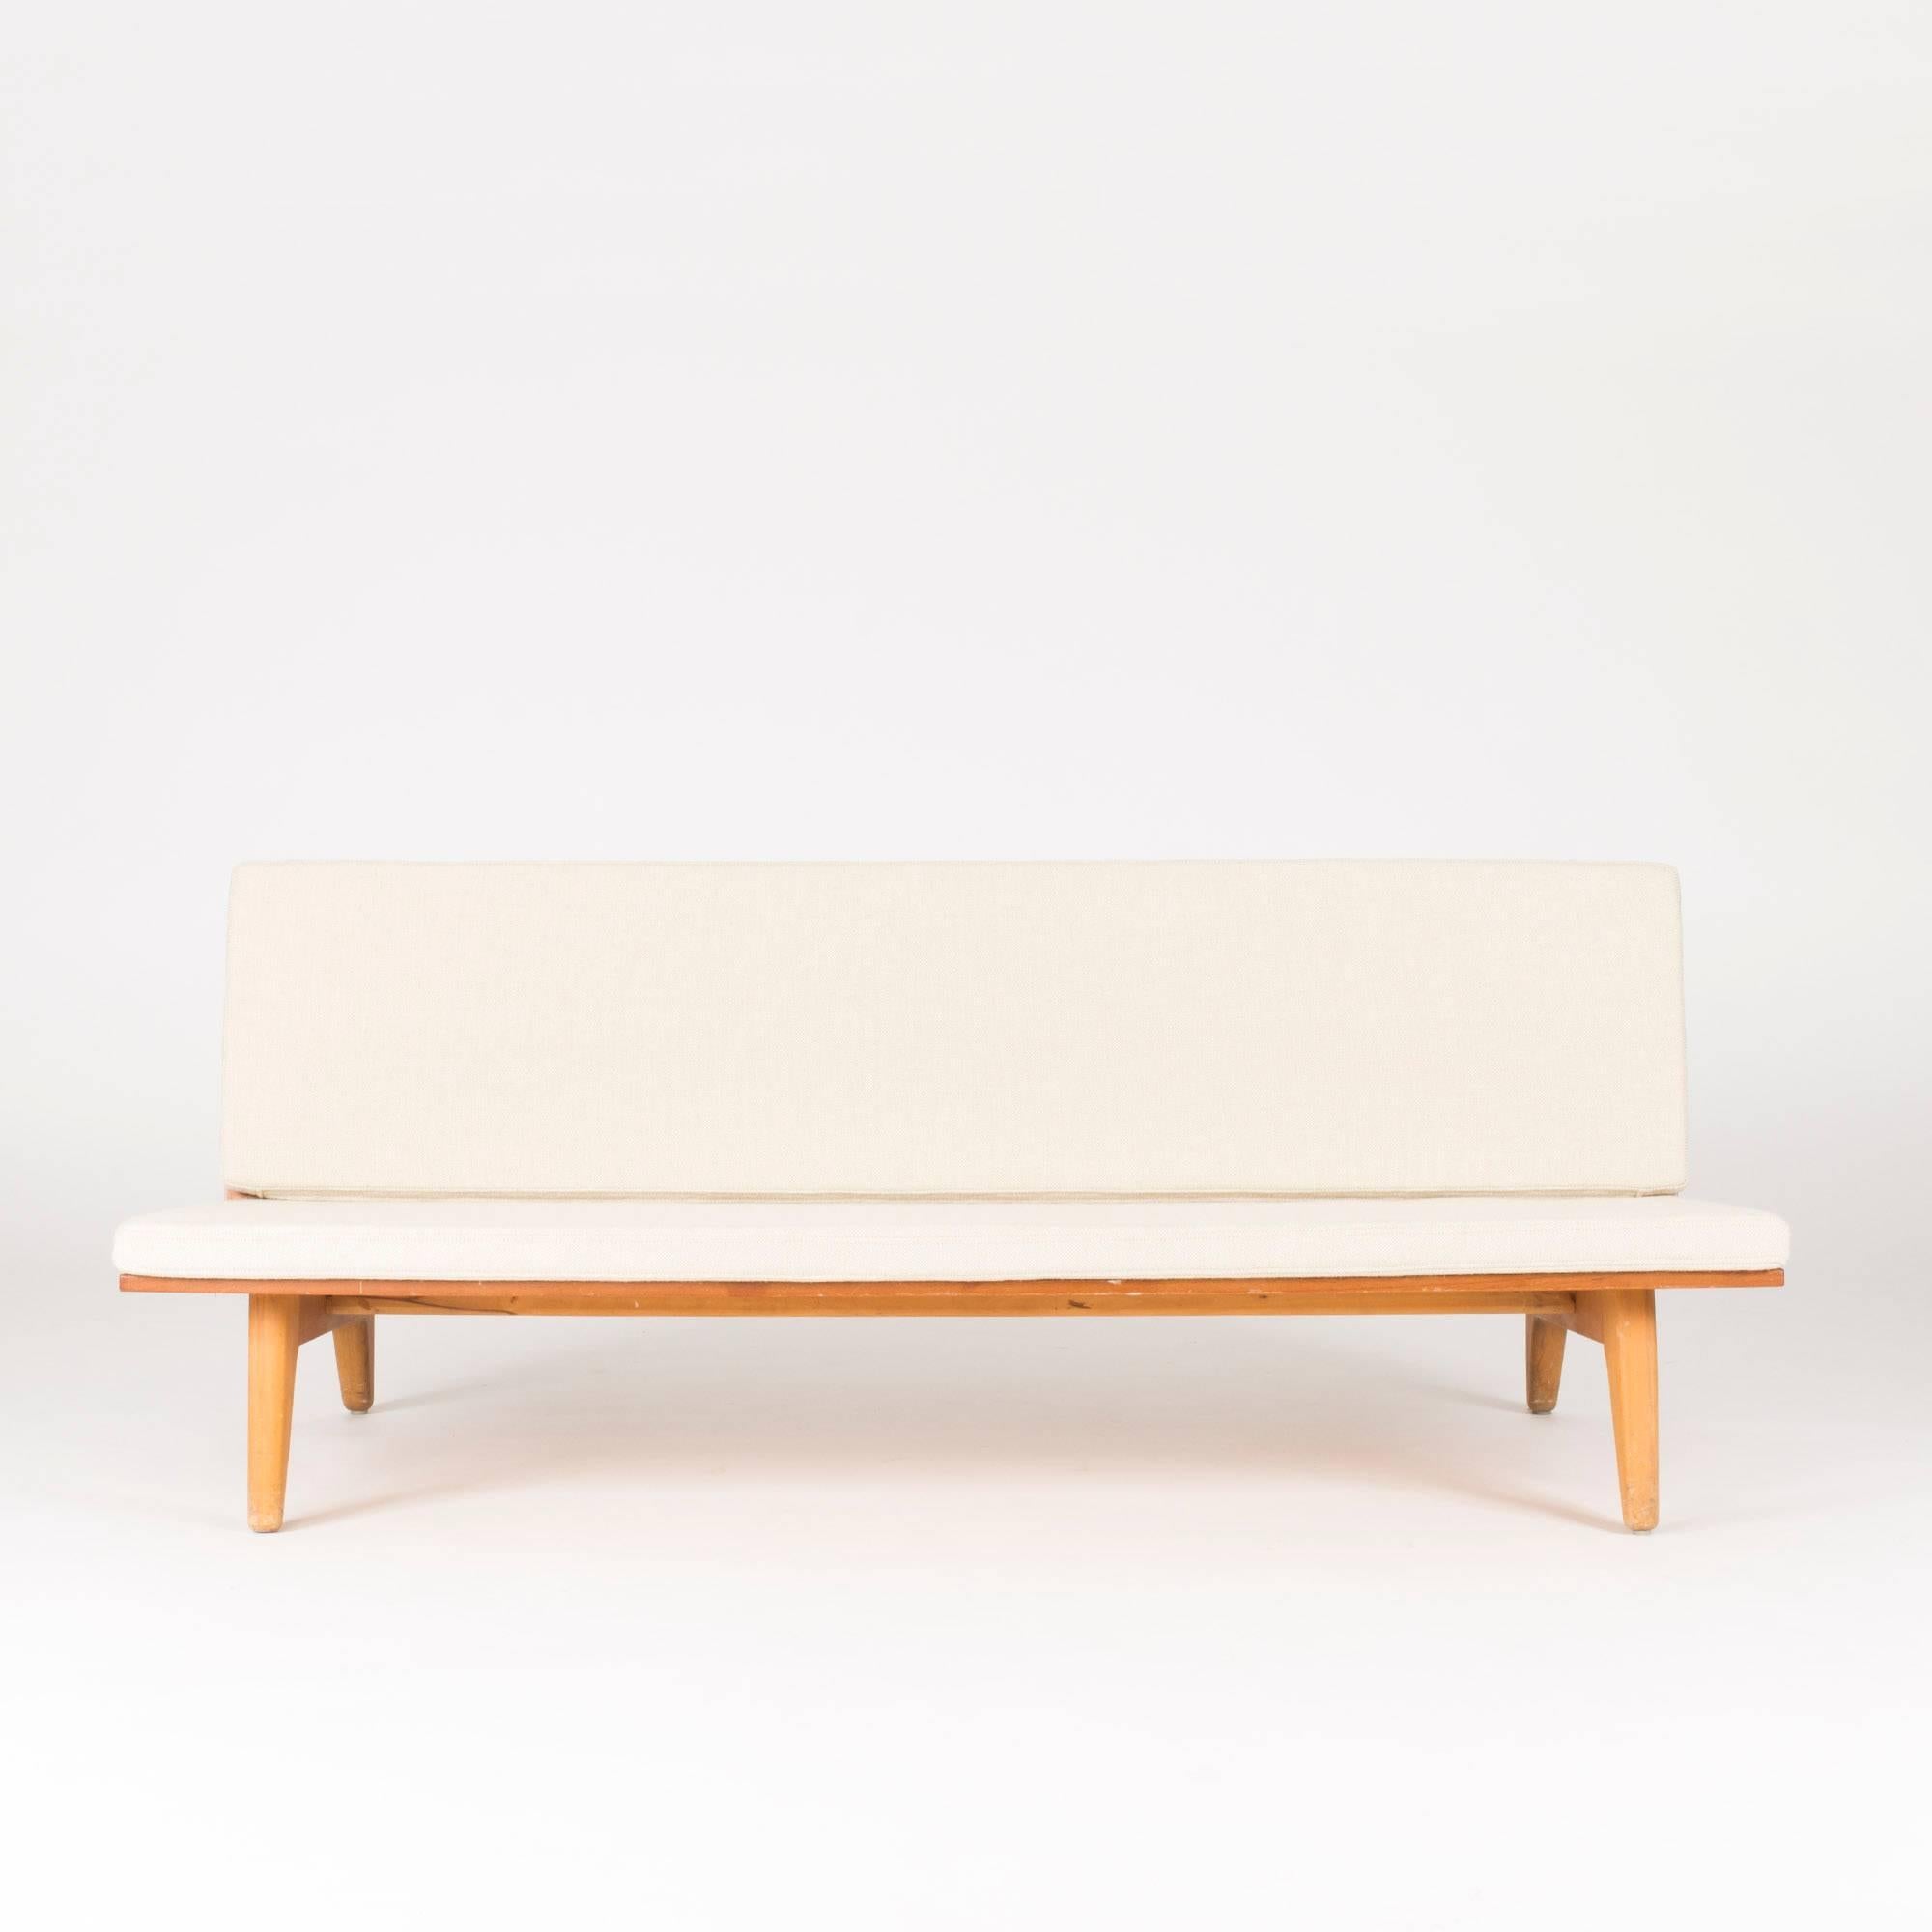 Rare teak sofa designed by Gustaf Hiort af Ornäs and produced by Gösta Westerberg. The sofa is made from two teak rectangles forming the seat and back, on sculpted legs. The wool-clad cushions are removable. A pair is available.